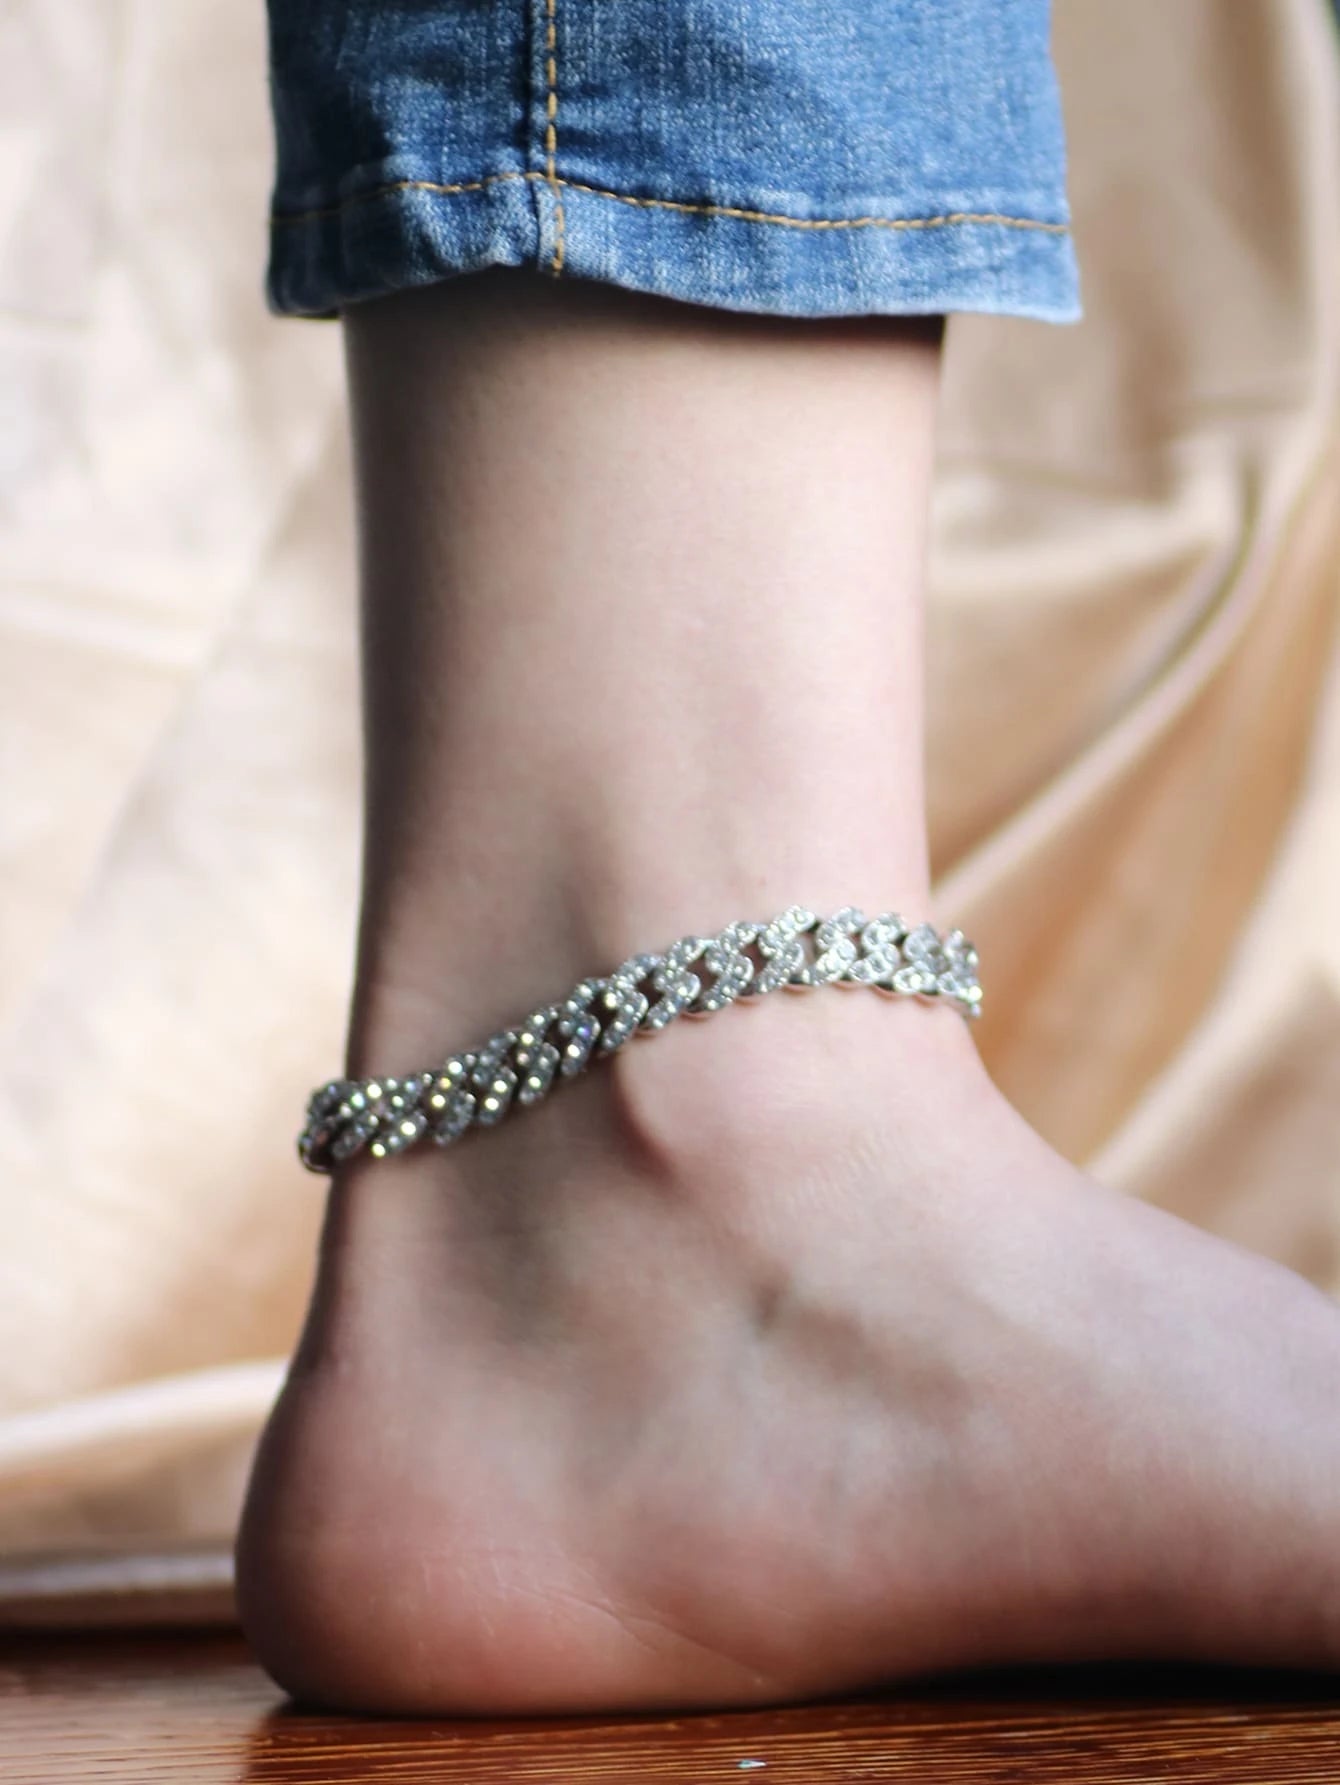 Anklet adorned with Rhinestone Decoration